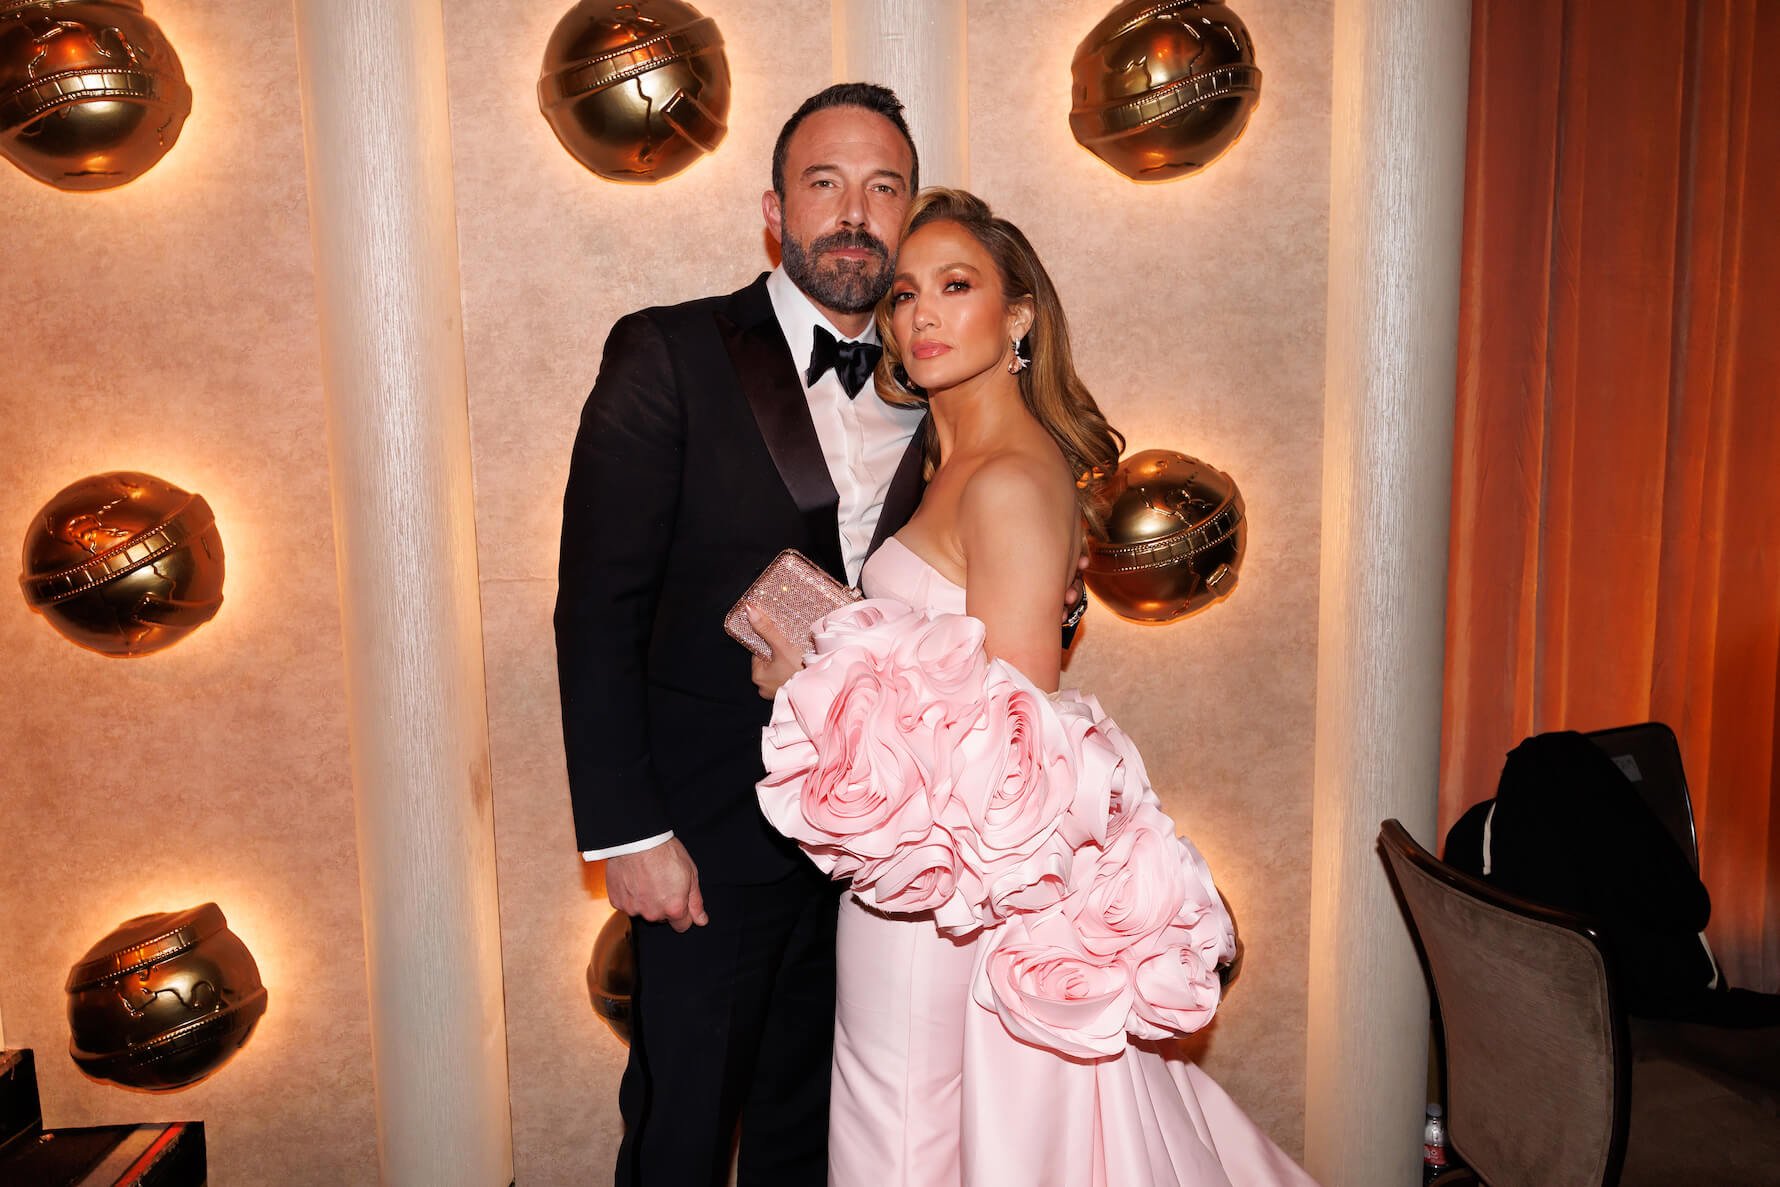 Ben Affleck in a suit and Jennifer Lopez in a pink dress posing together at the 81st Golden Globe Awards